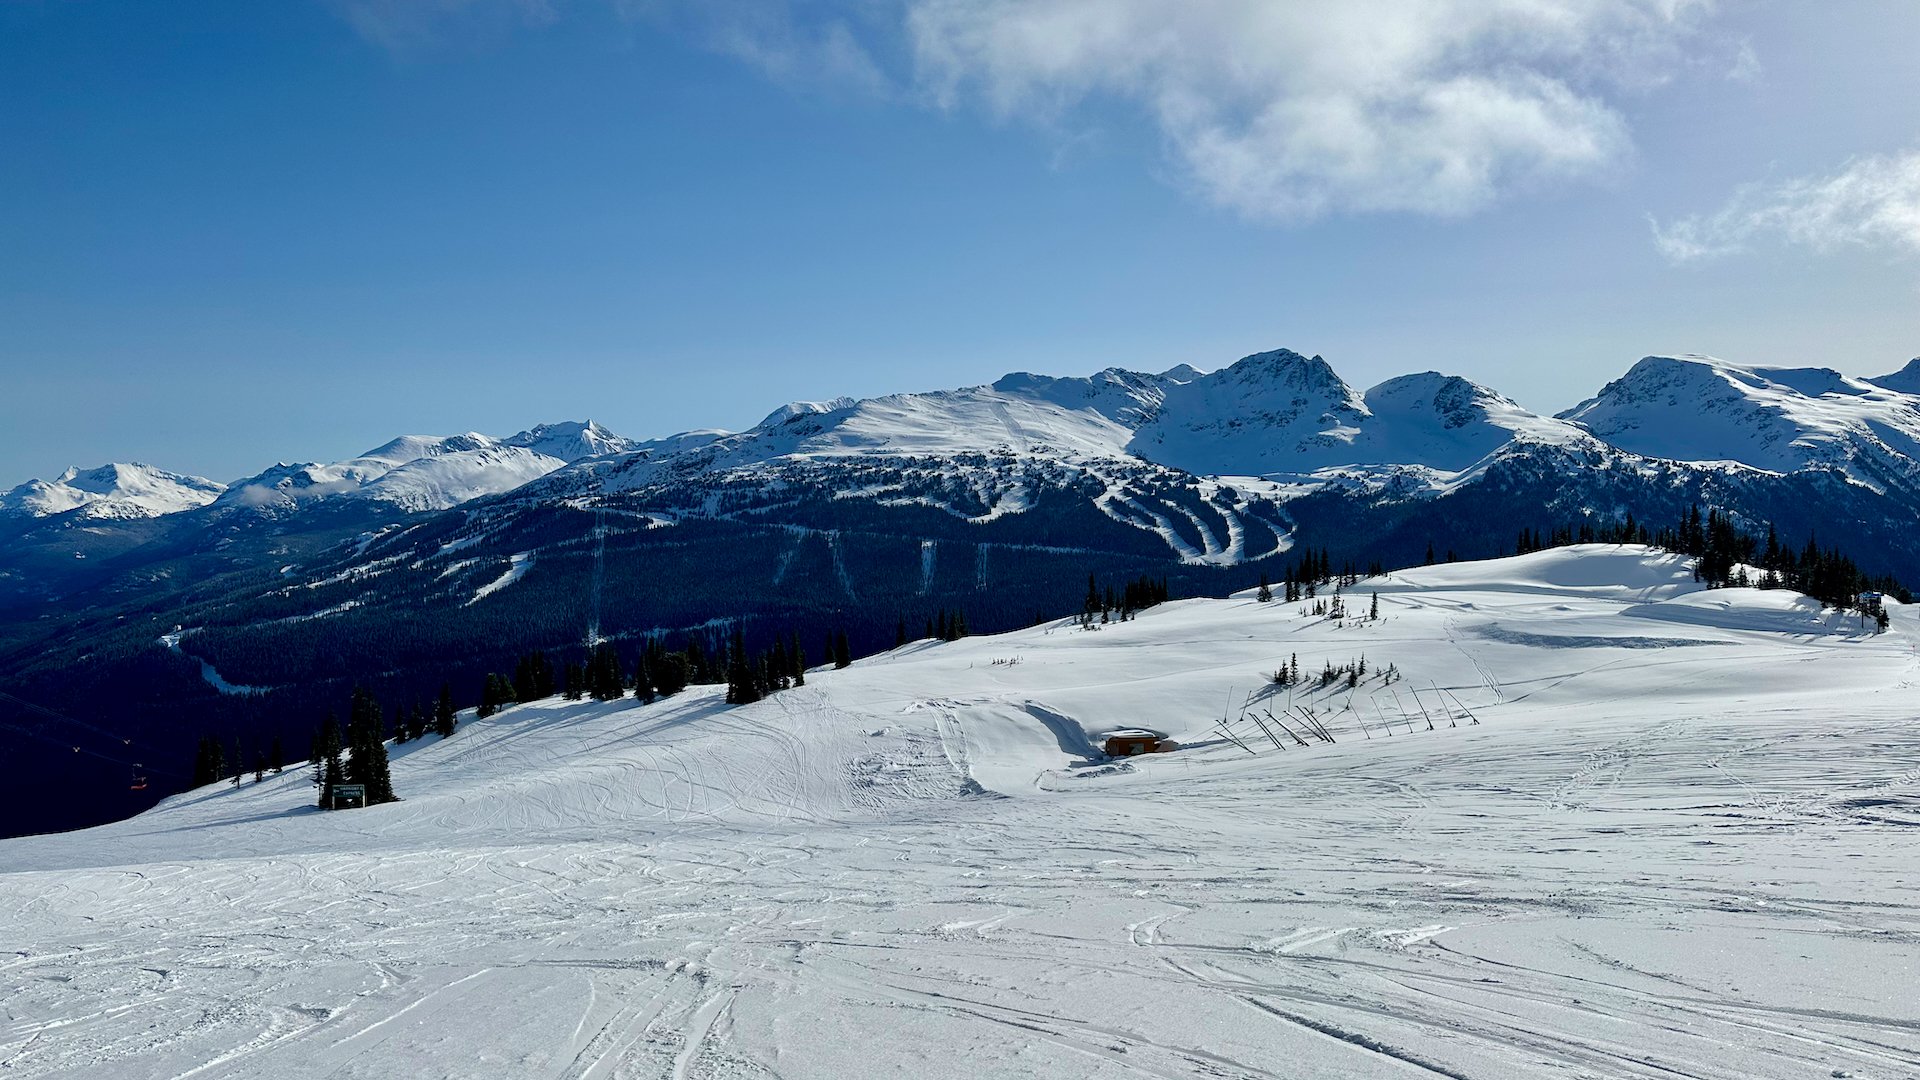  Looking across the valley to Blackcomb. 